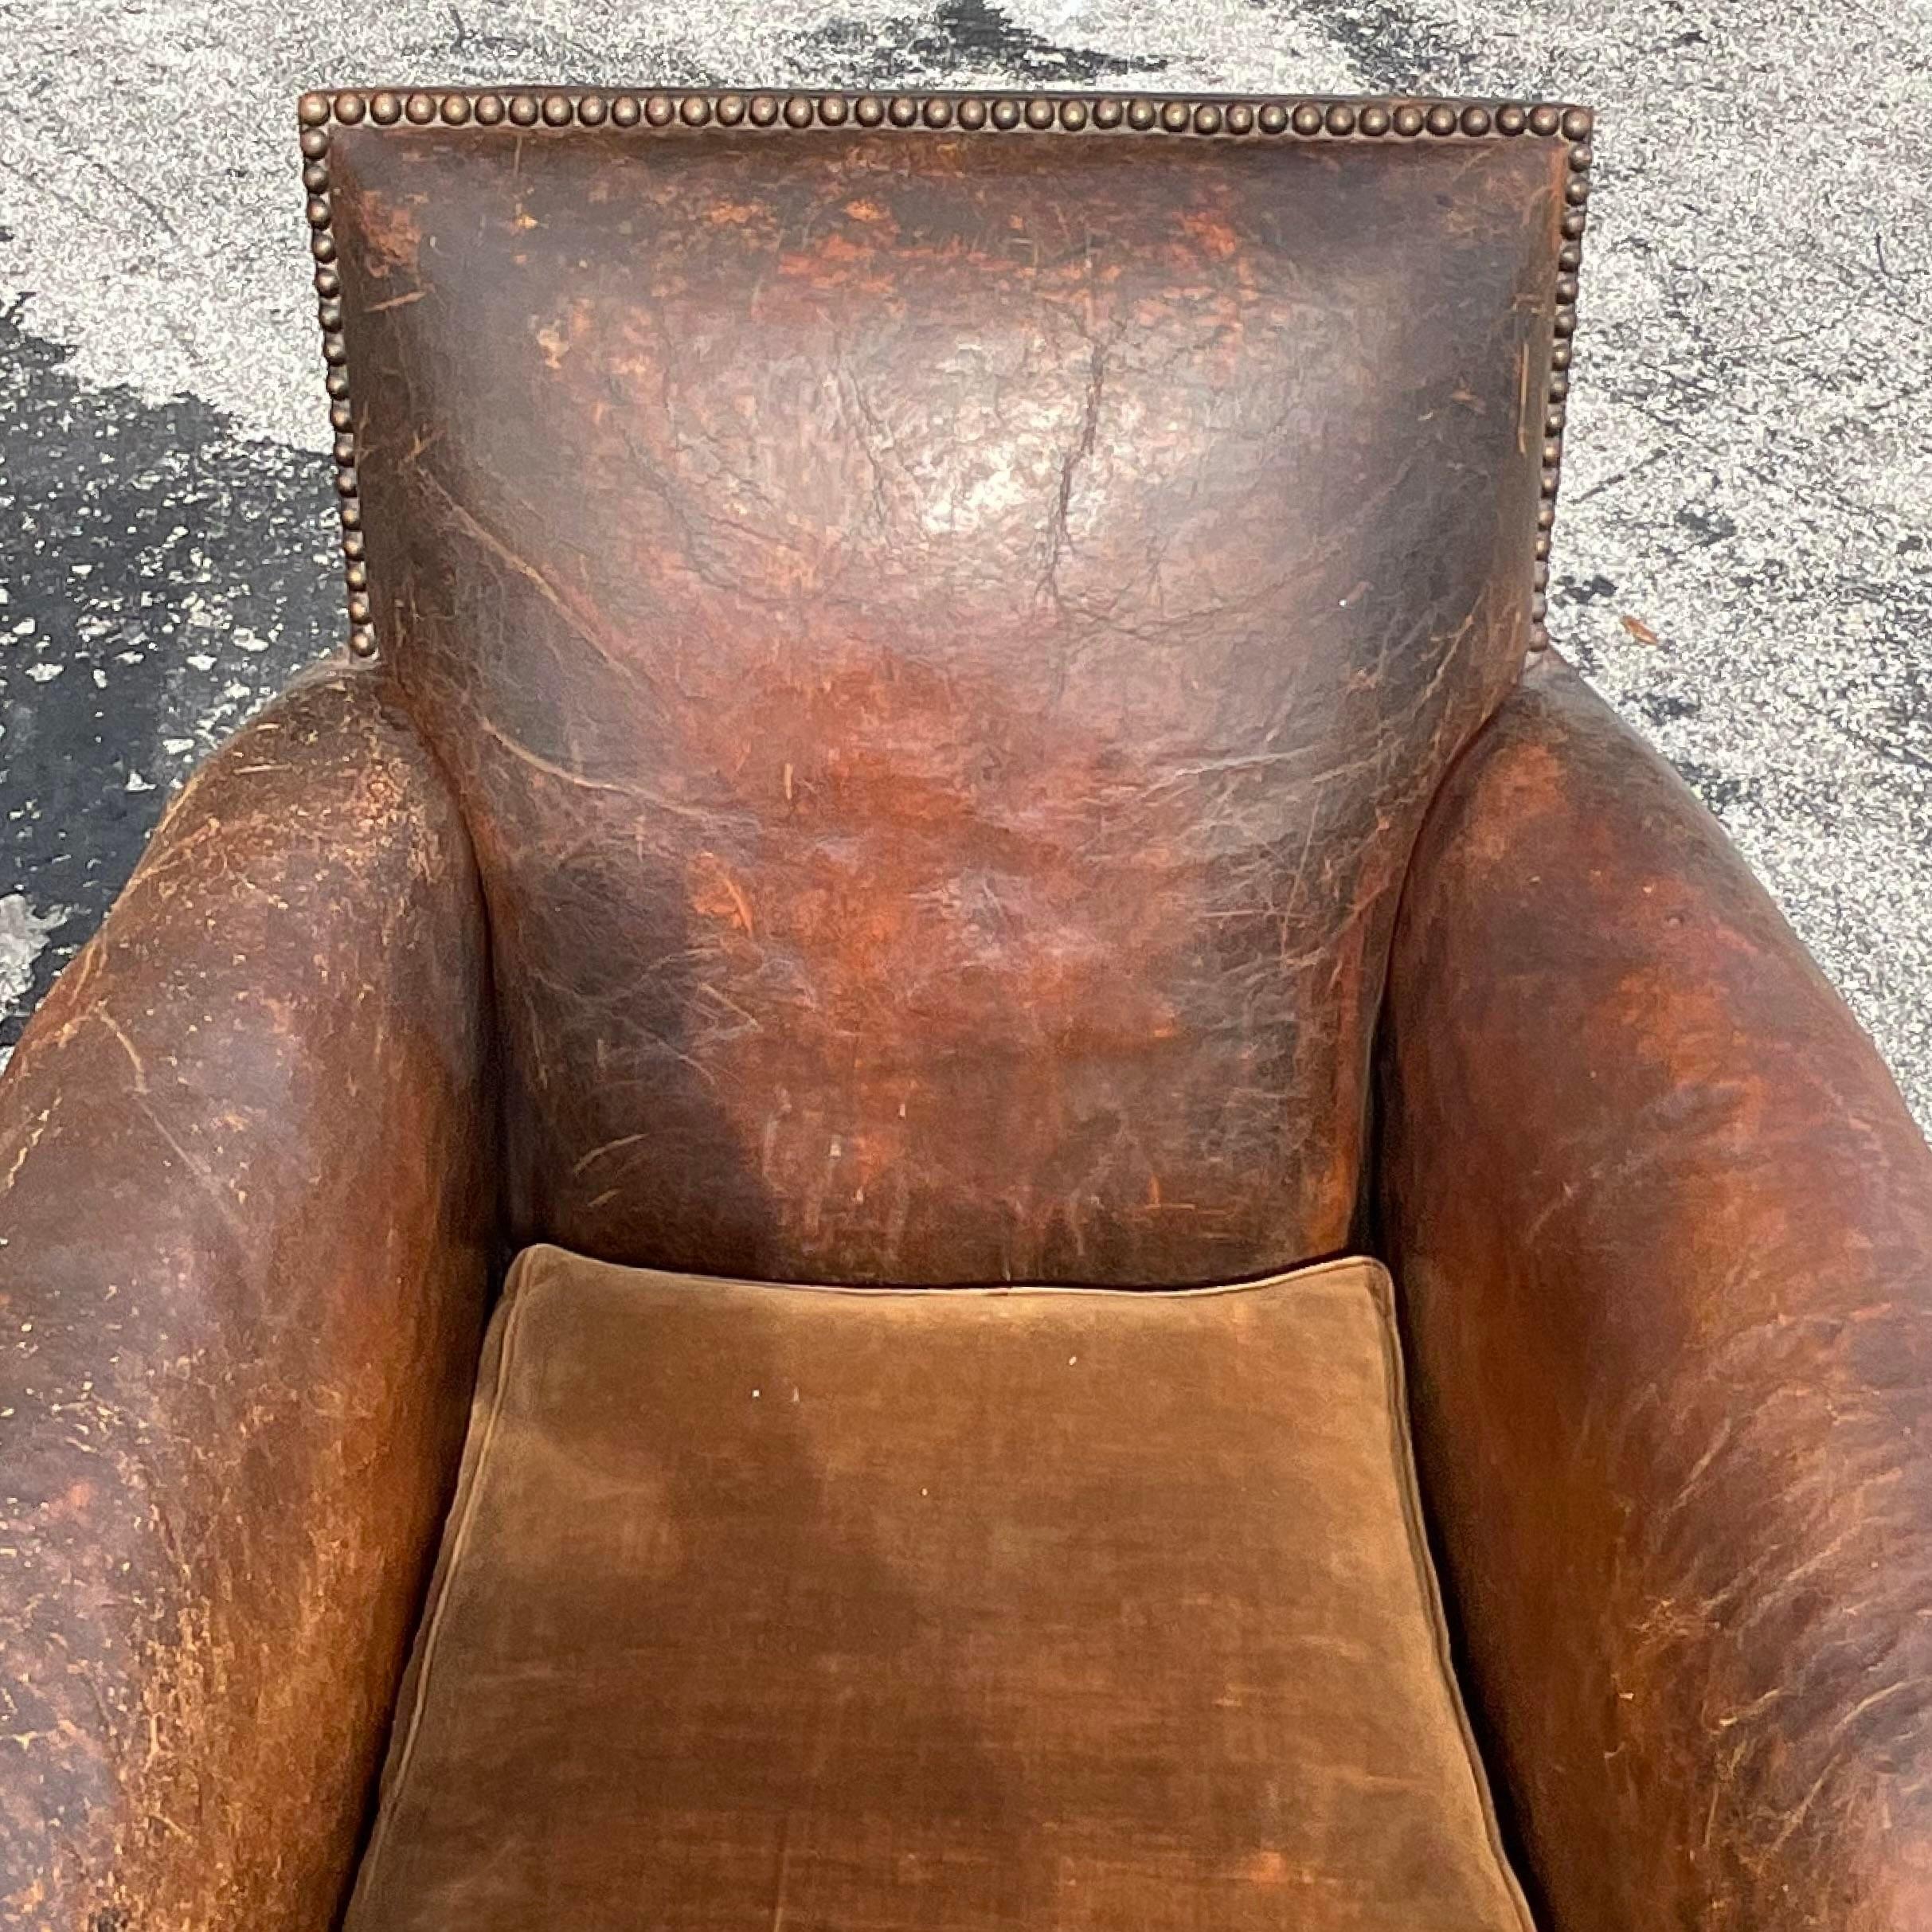 An incredible pair of vintage Boho club chairs. Chic 1920s French Art Deco in a distressed leather upholstery. A caramel colored mohair cushion. A nailhead trim adds to the charm. Acquired from a Palm Beach estate. 